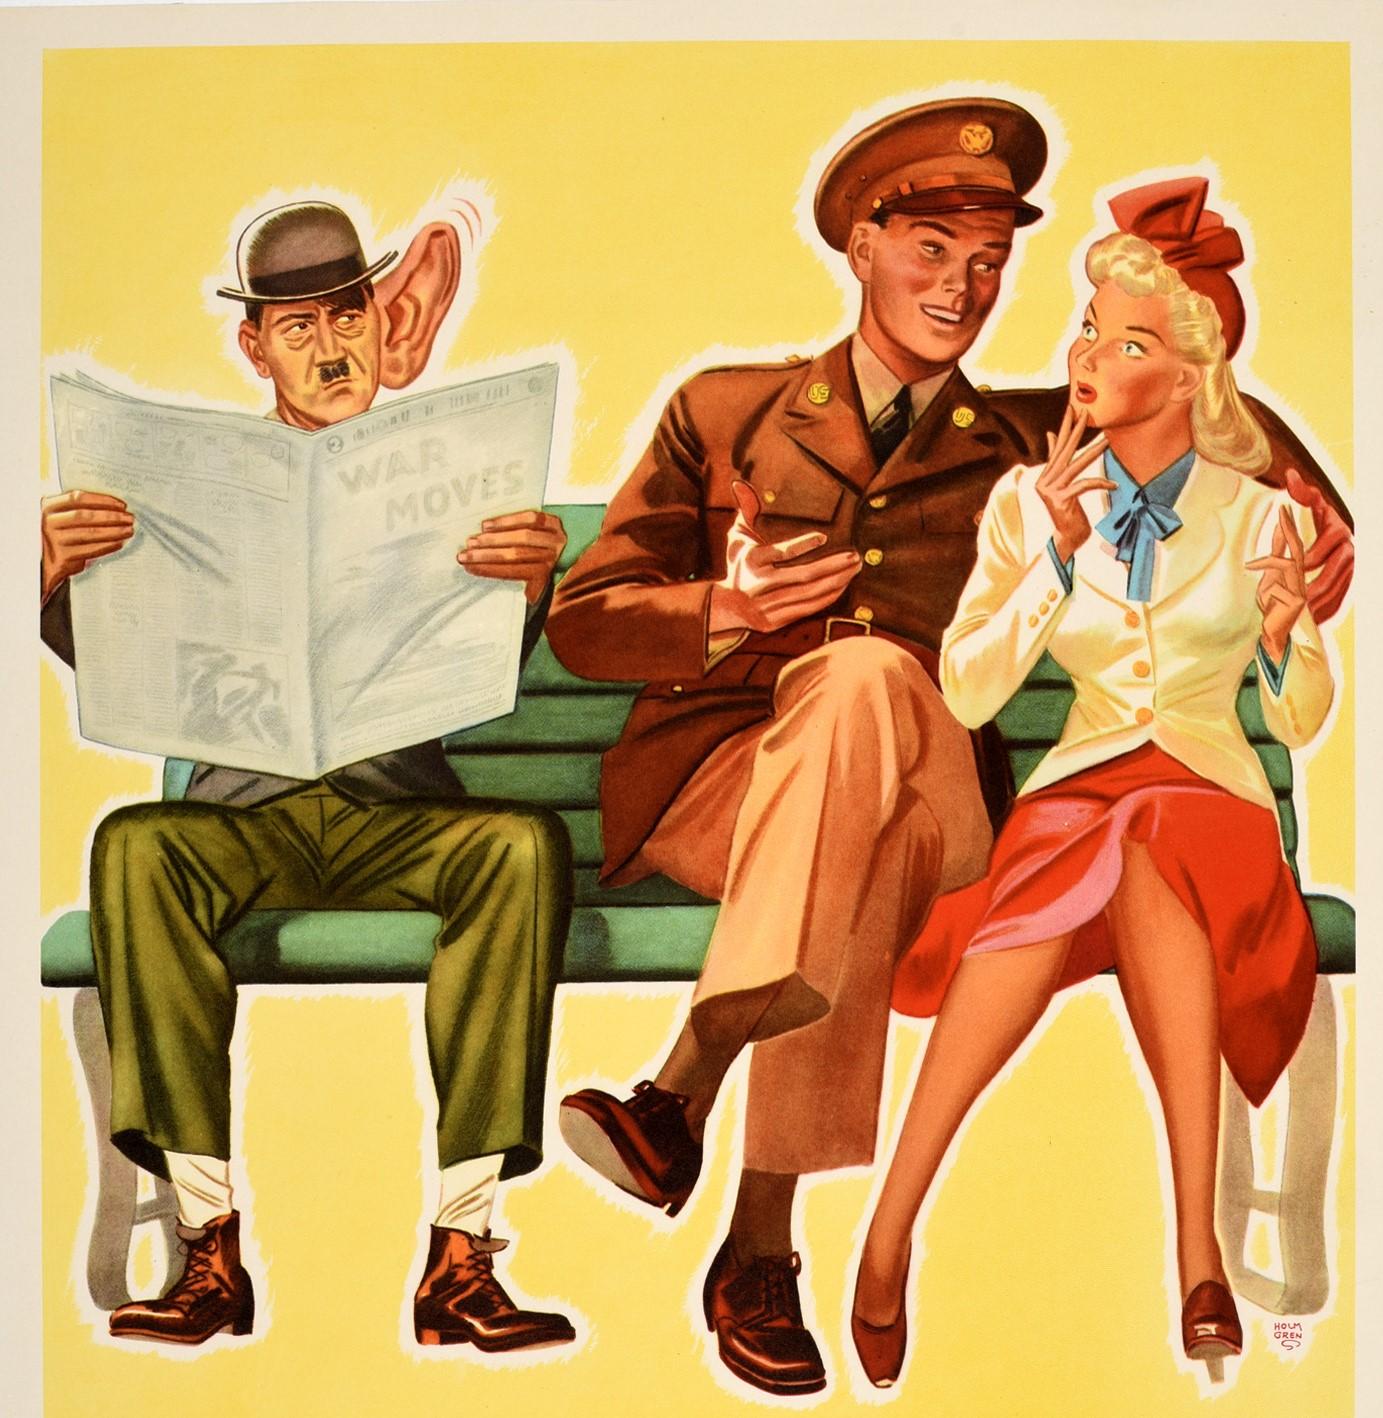 Original vintage World War Two propaganda poster - Loose Talk Can Cost Lives - featuring colourful artwork by John R. Holmgren (1897-1963) depicting a soldier in uniform with his arm around a surprised looking lady sitting on a bench, telling her